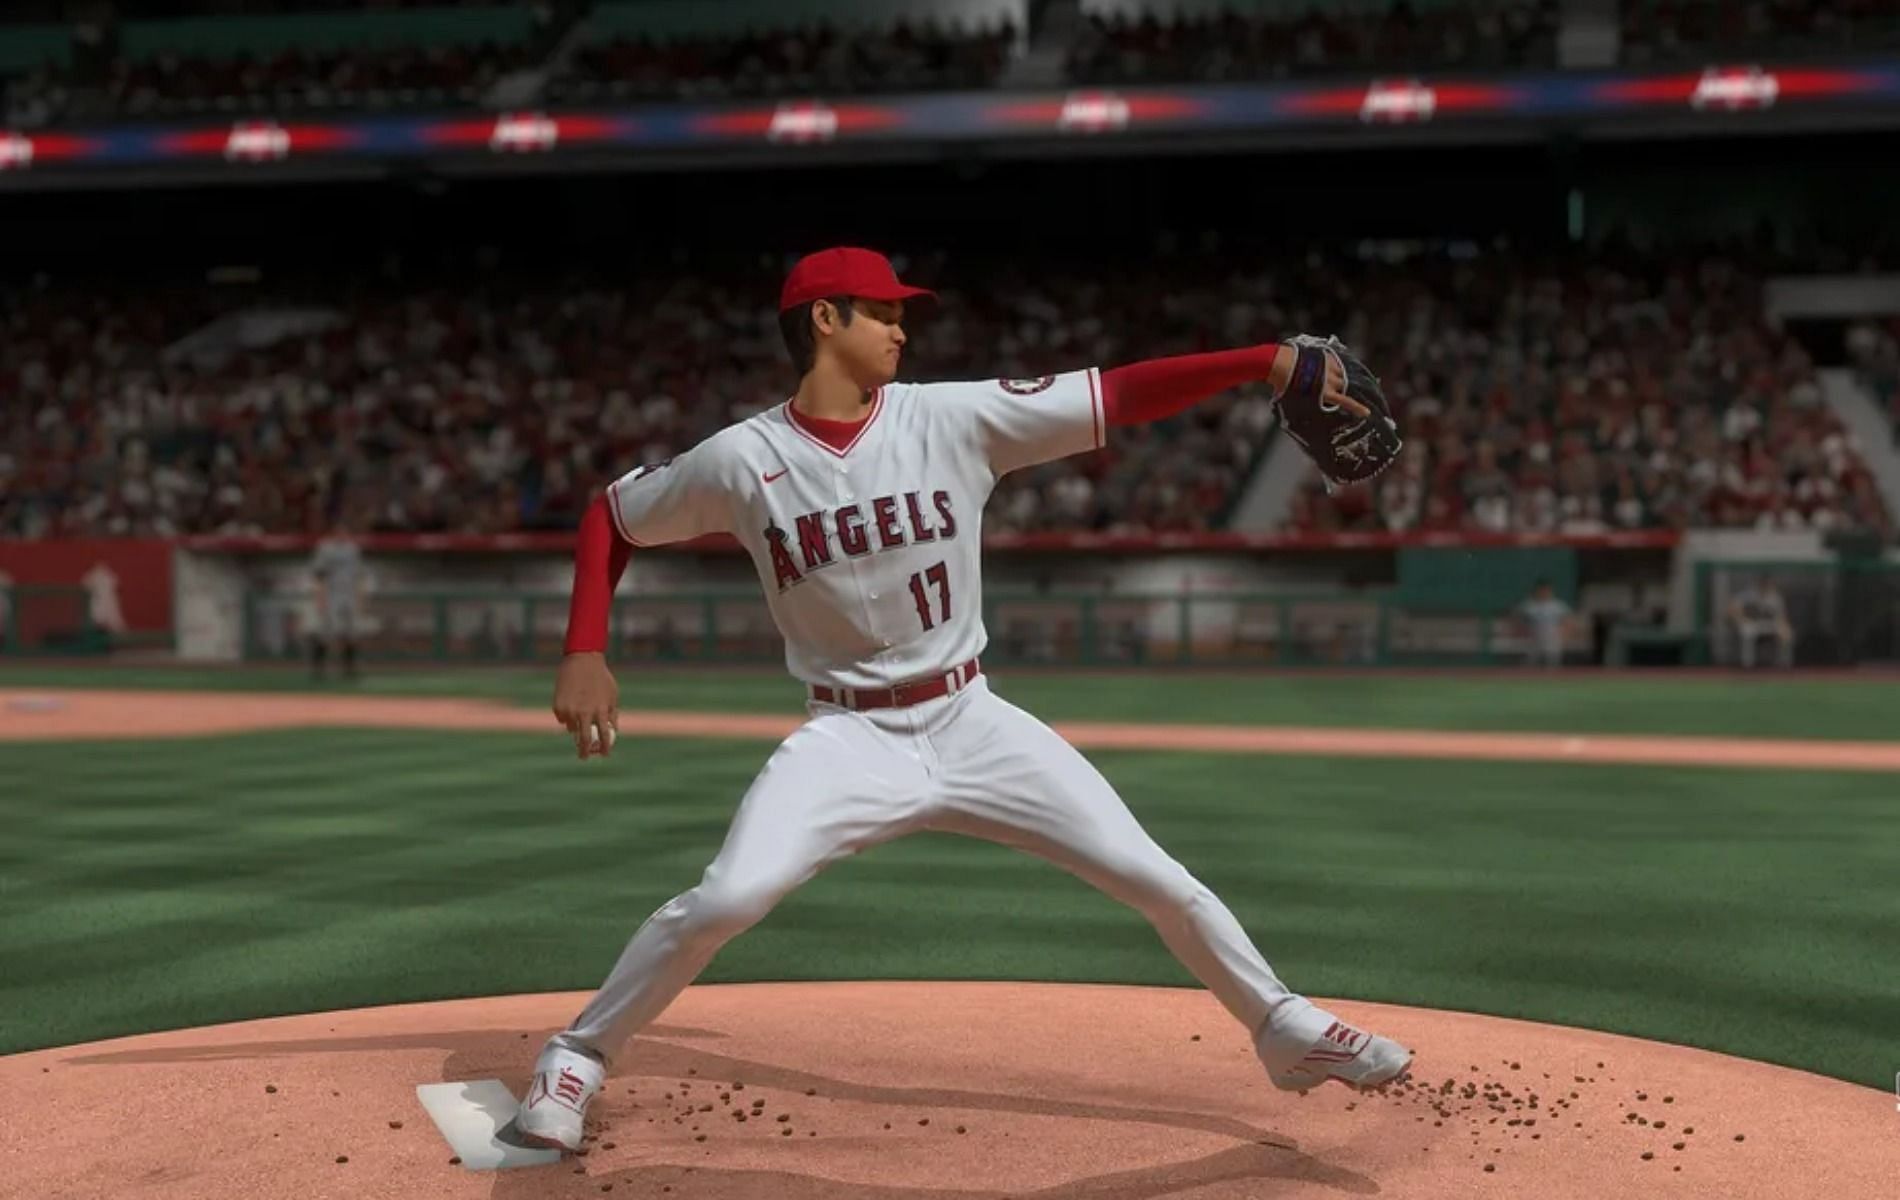 How to edit uniforms in MLB The Show 22